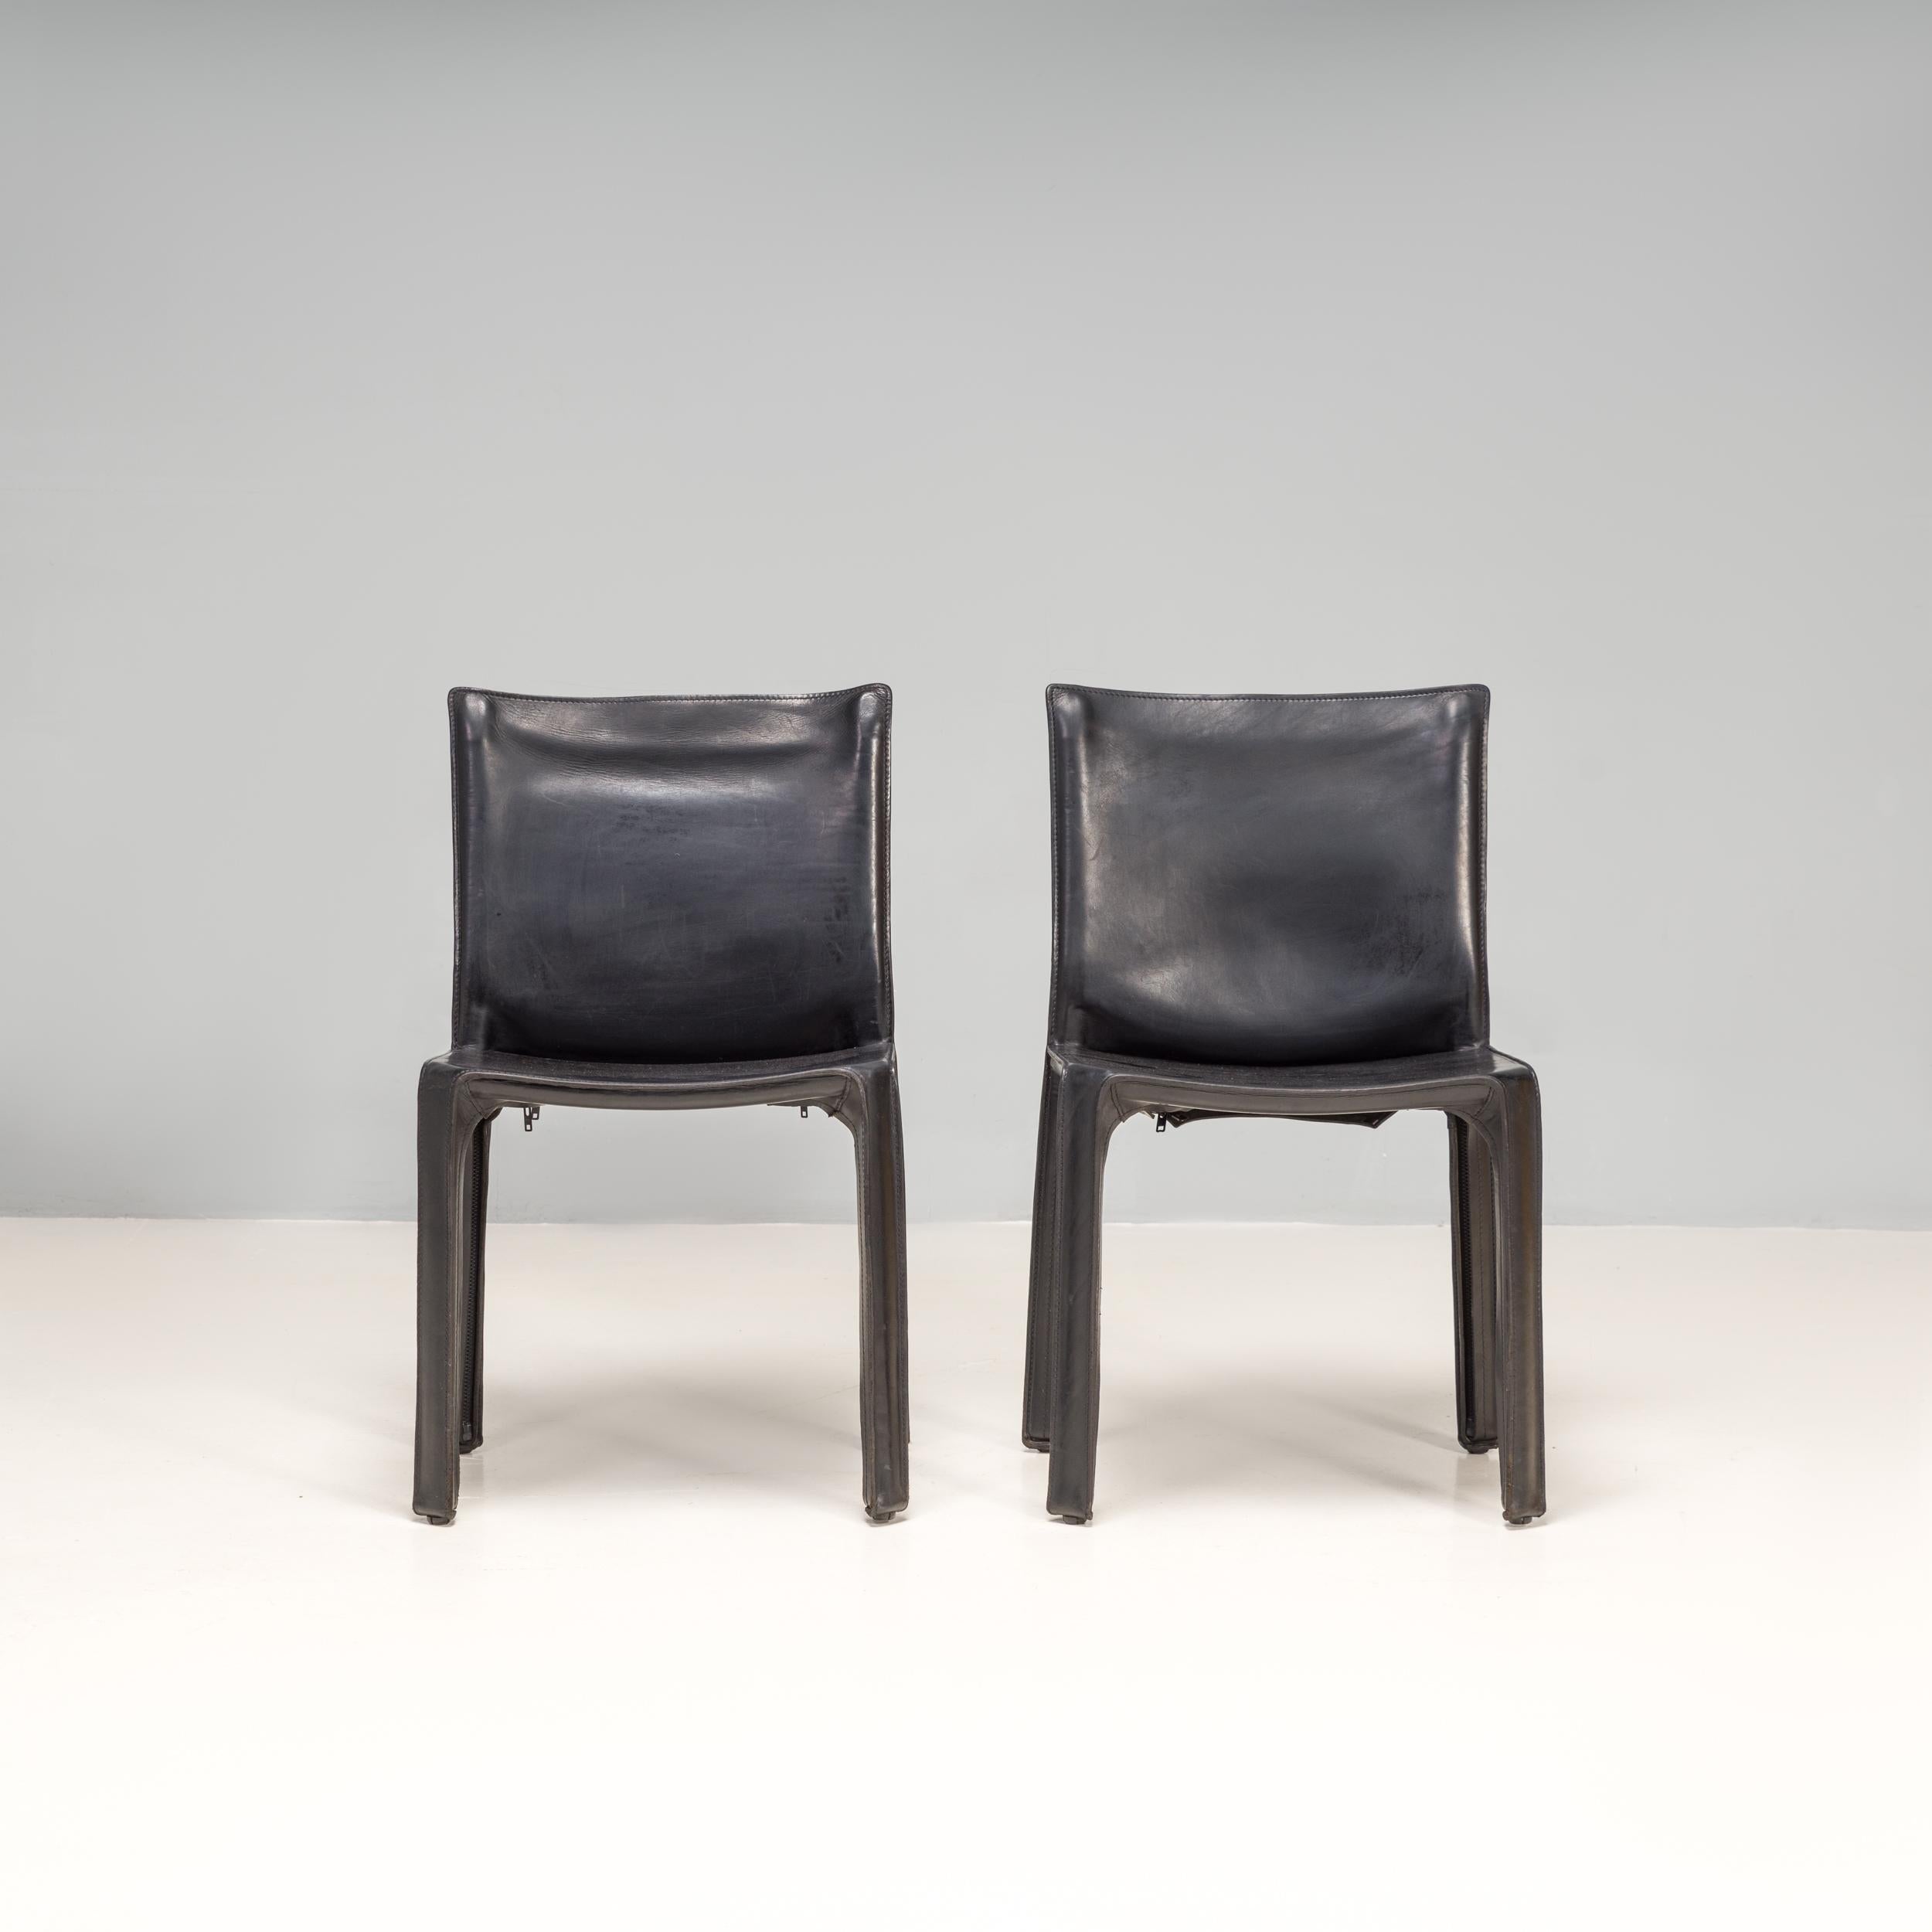 Designed by Mario Bellini in 1977, the cab dining chairs have since become a signature piece in the Cassina furniture collection.

These original 1970s dining chairs are constructed from a steel frame and are covered in black leather upholstery,